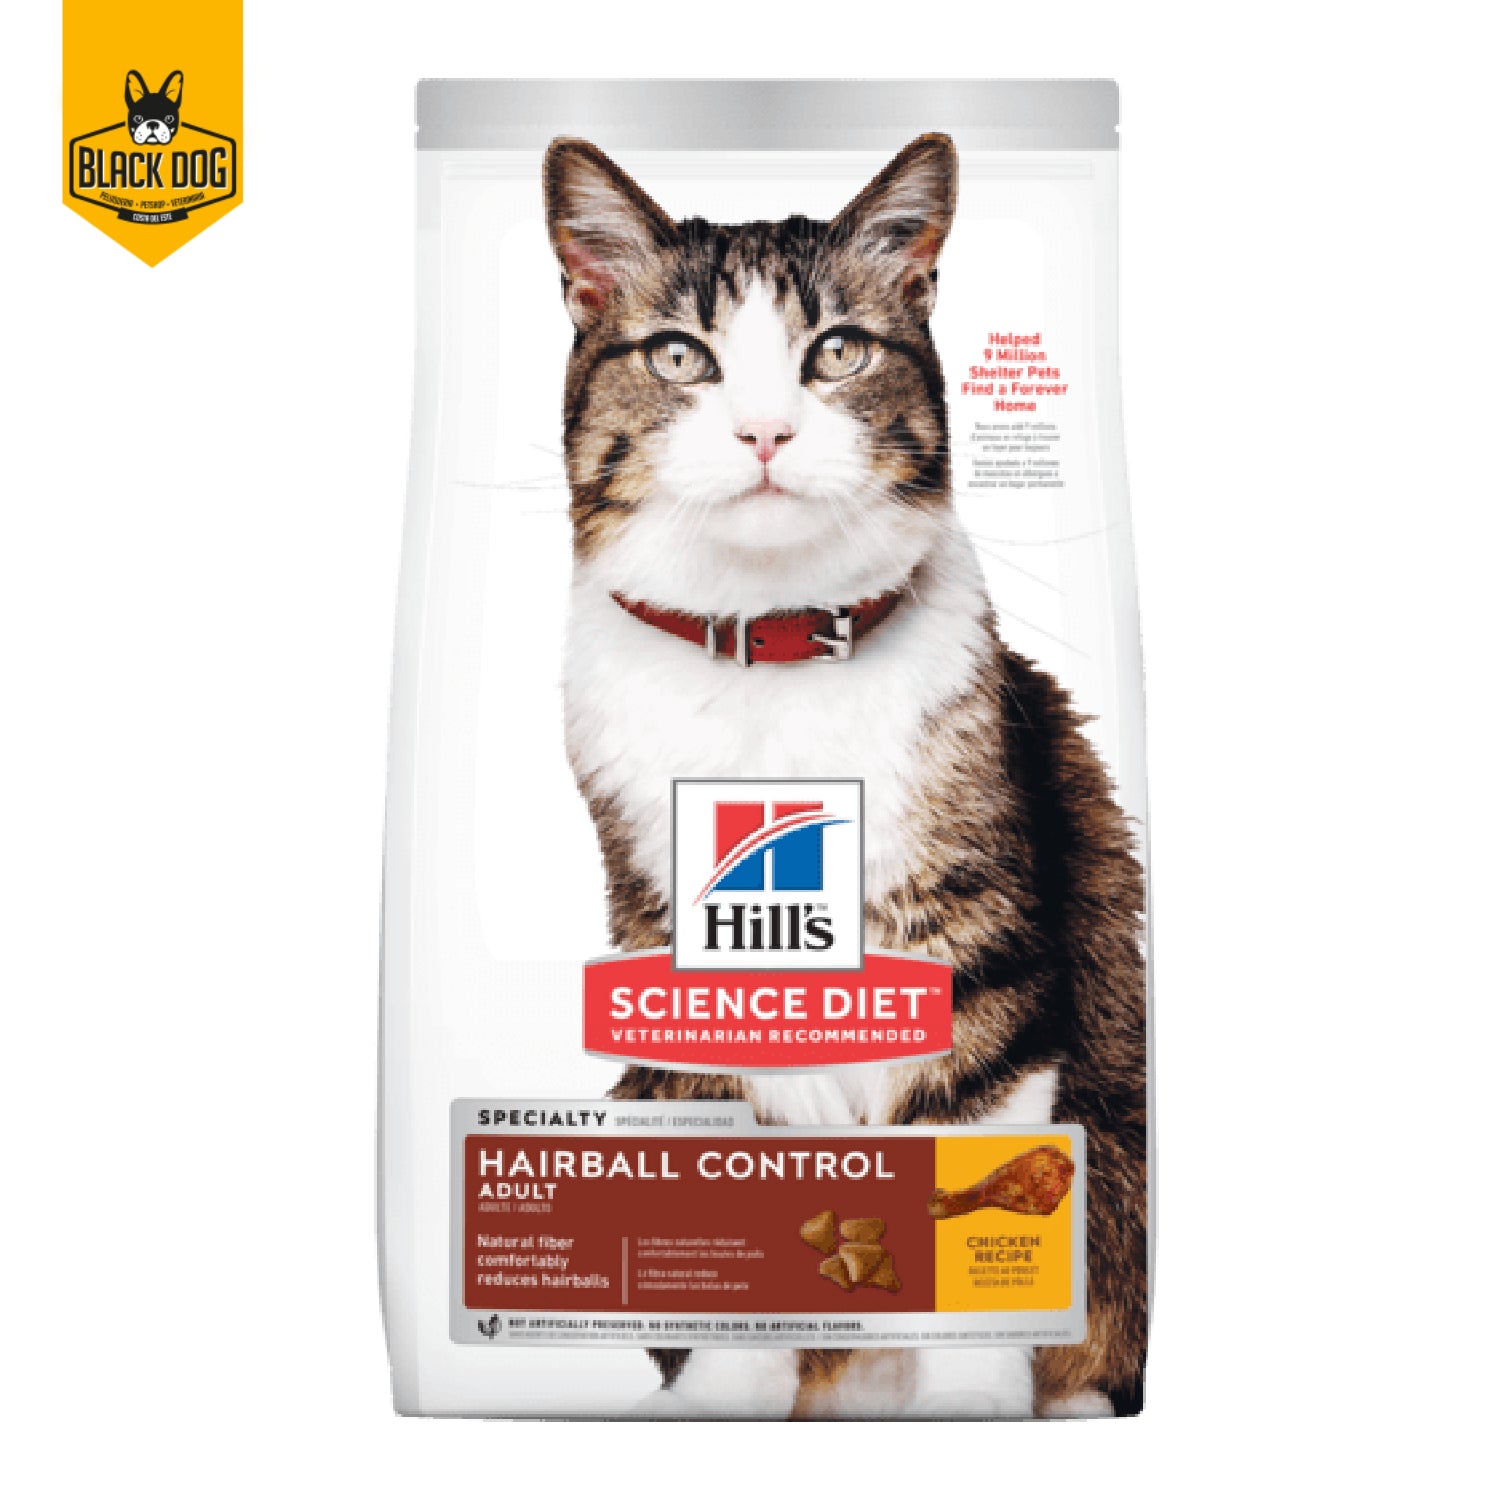 HILL´S | Science Diet | Hairball Control Adult | 3.5Lb - BlackDogPanama